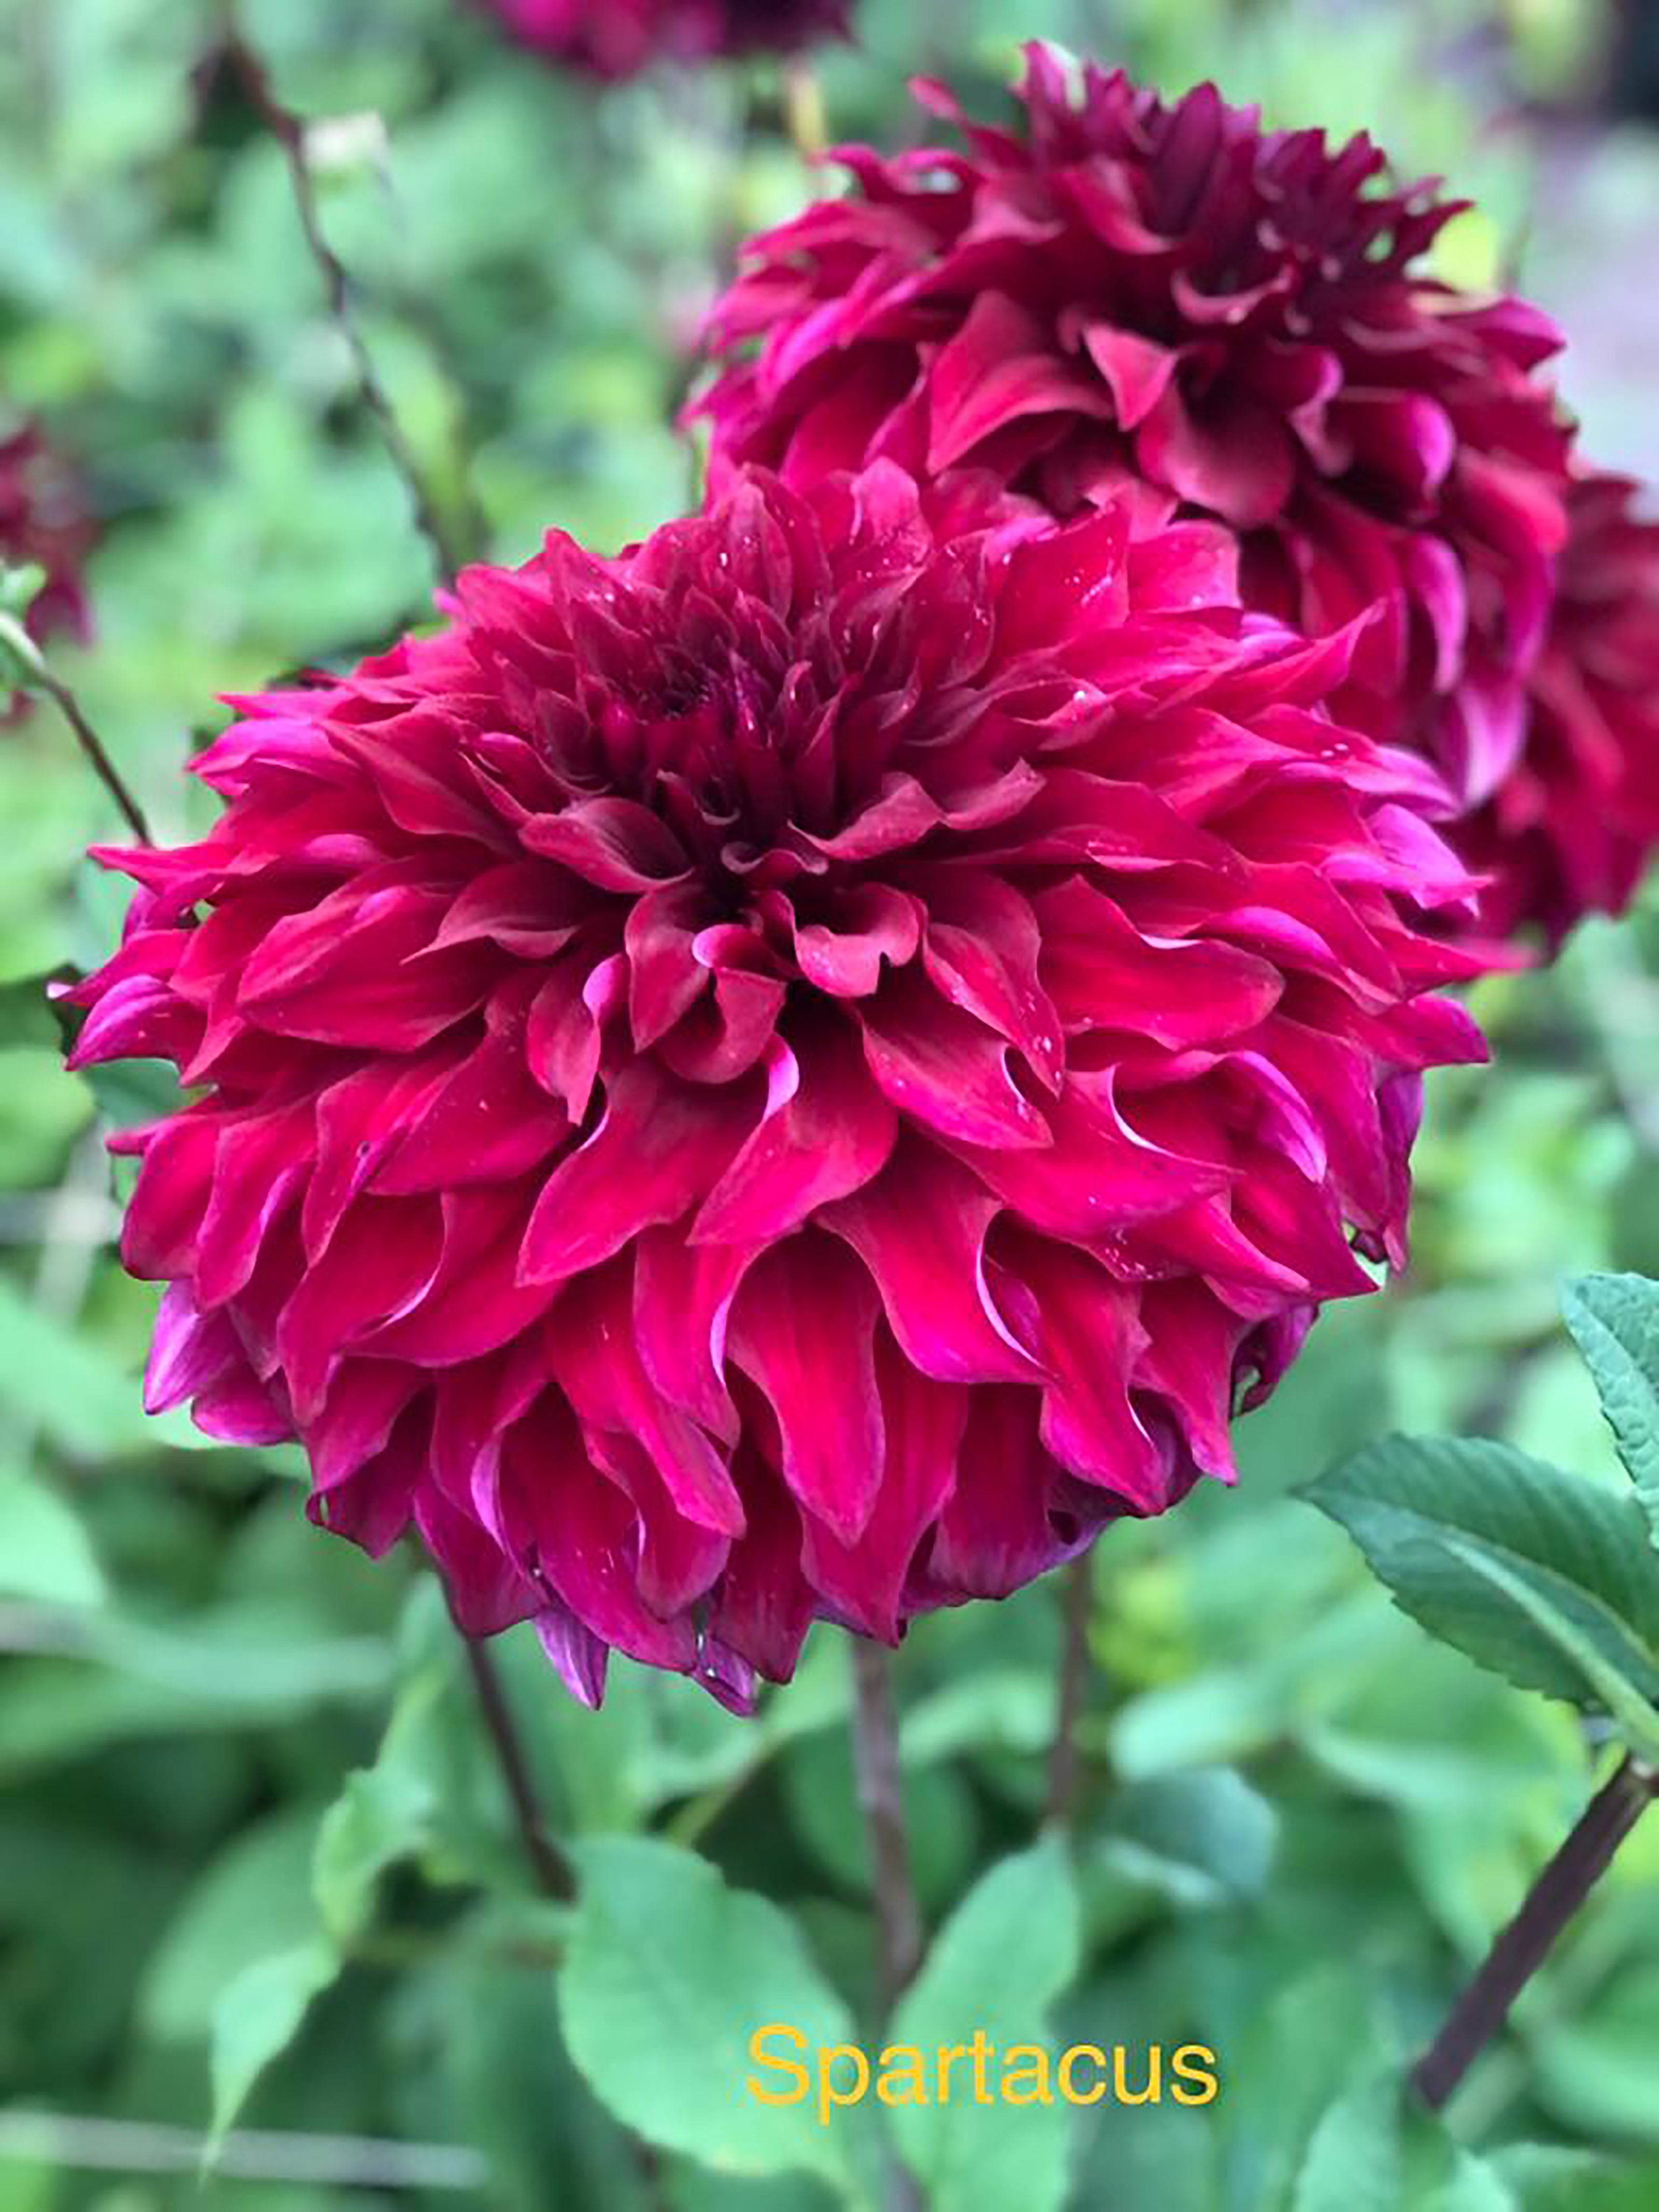 Dahlia 'Spartacus' decorative large flowered - 2, 3 or 5 tubers - Free delivery within the UK